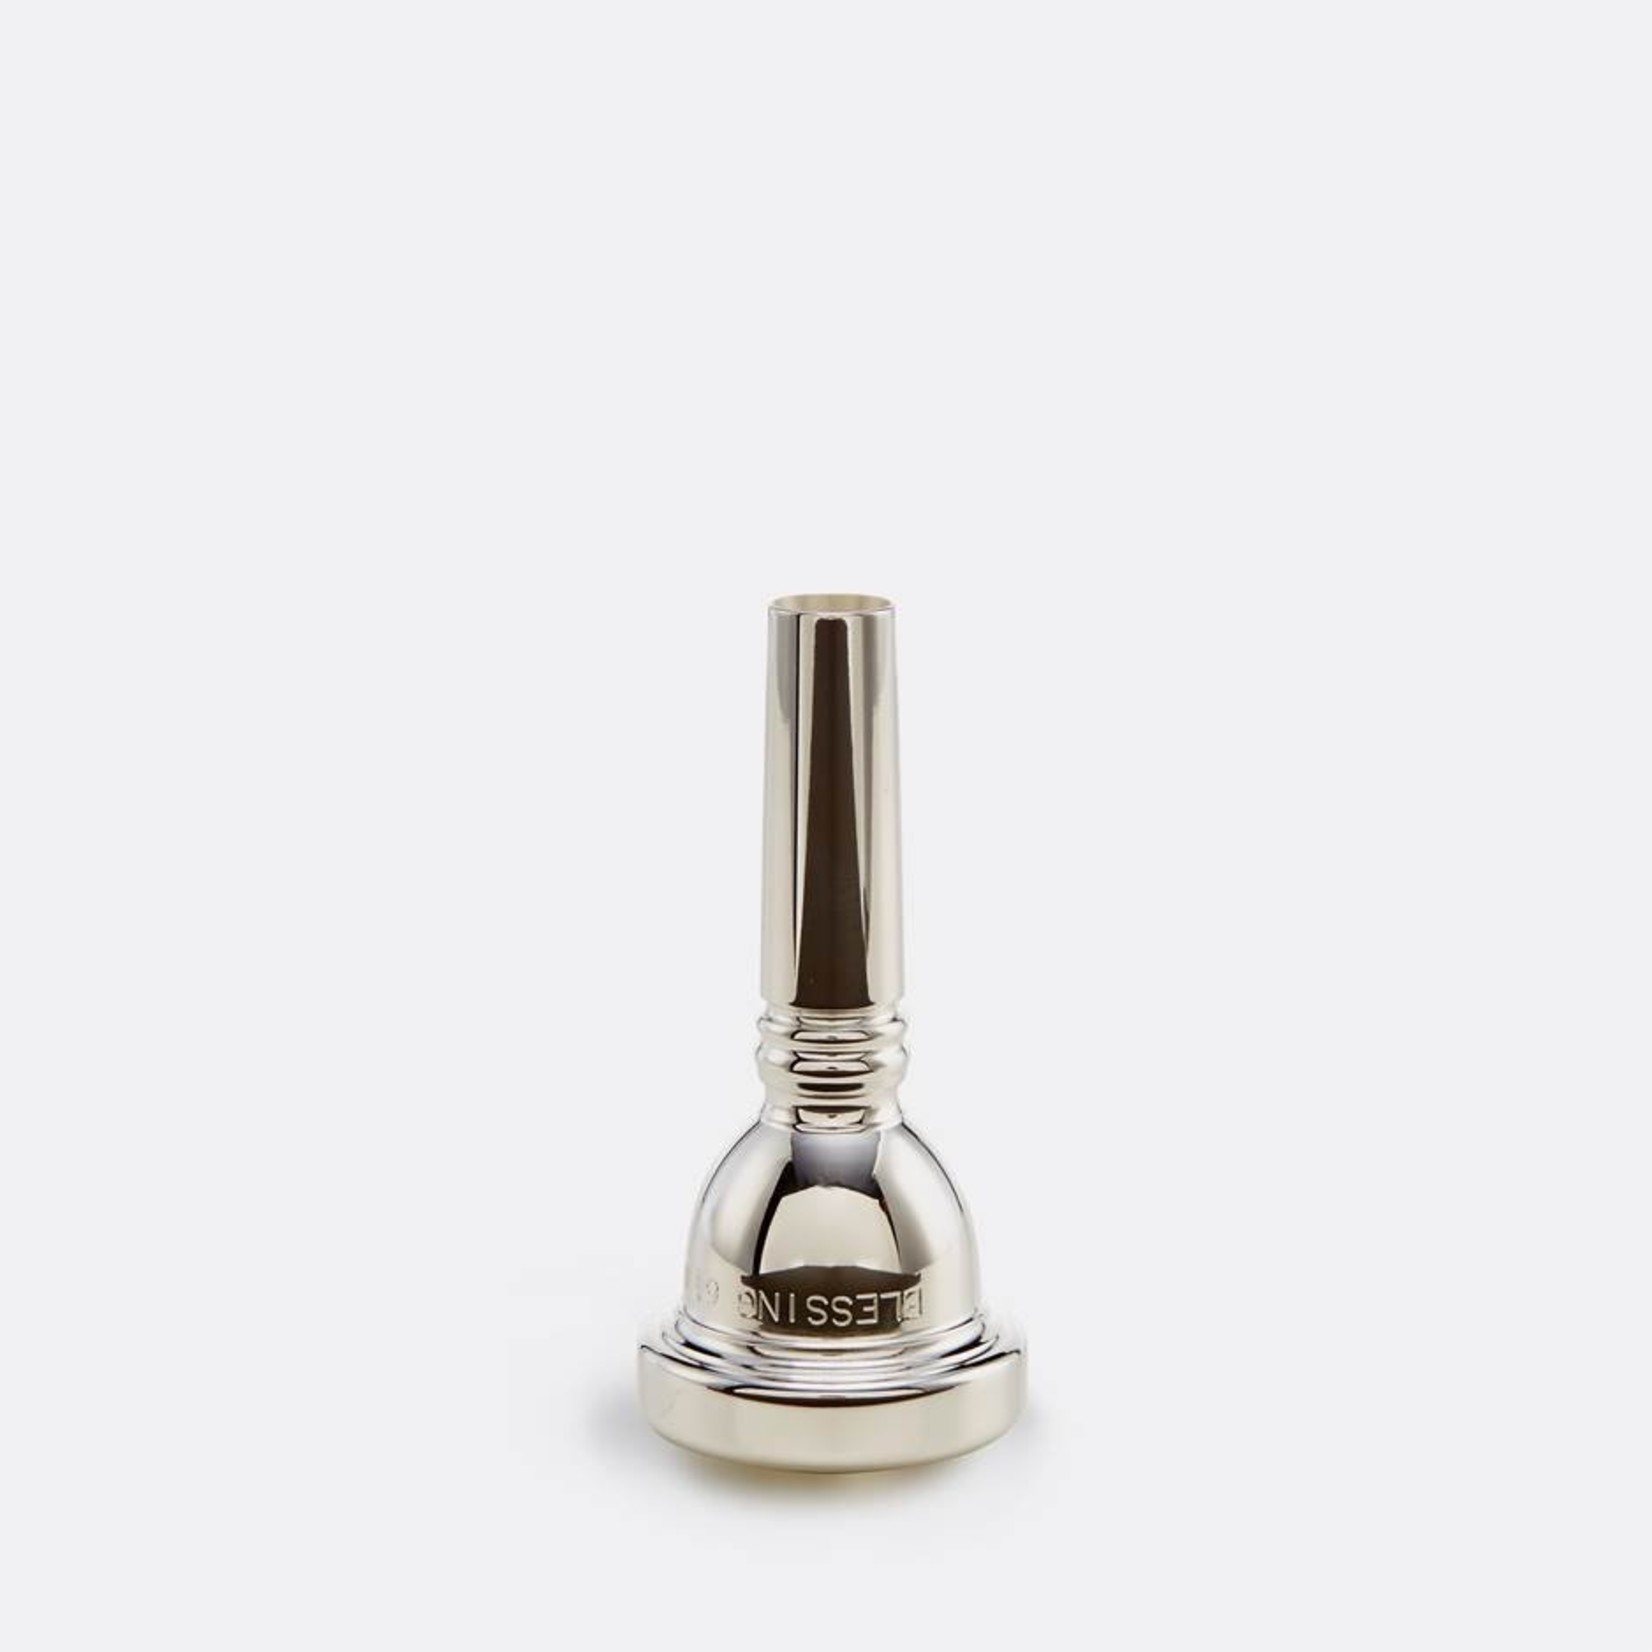 Blessing Blessing 6.5AL Trombone Mouthpiece (Small Shank)